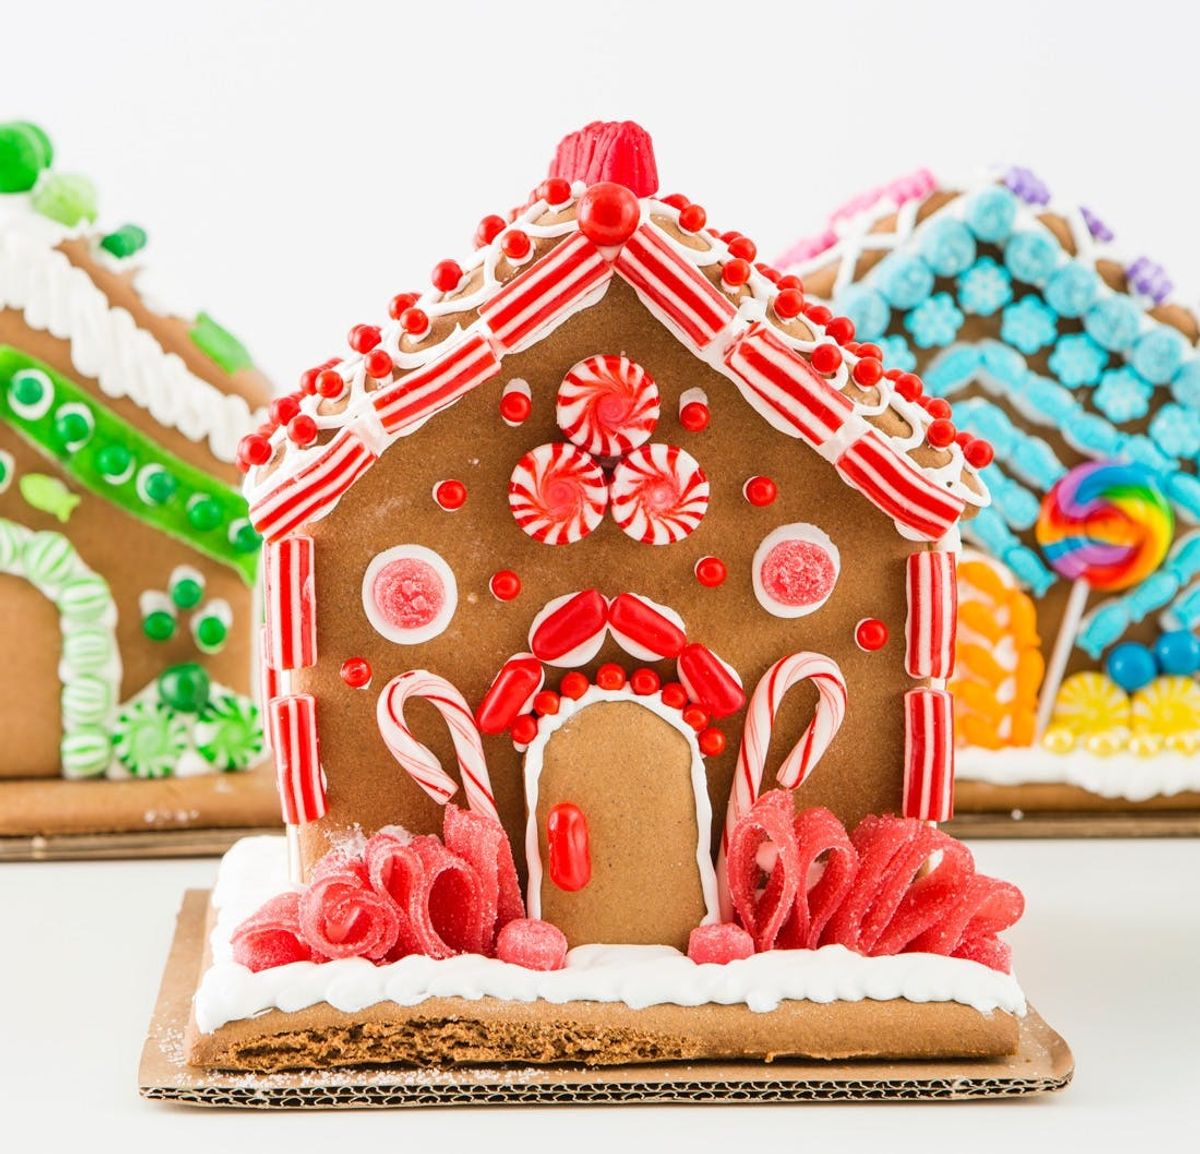 multicolored gingerbread house decorations